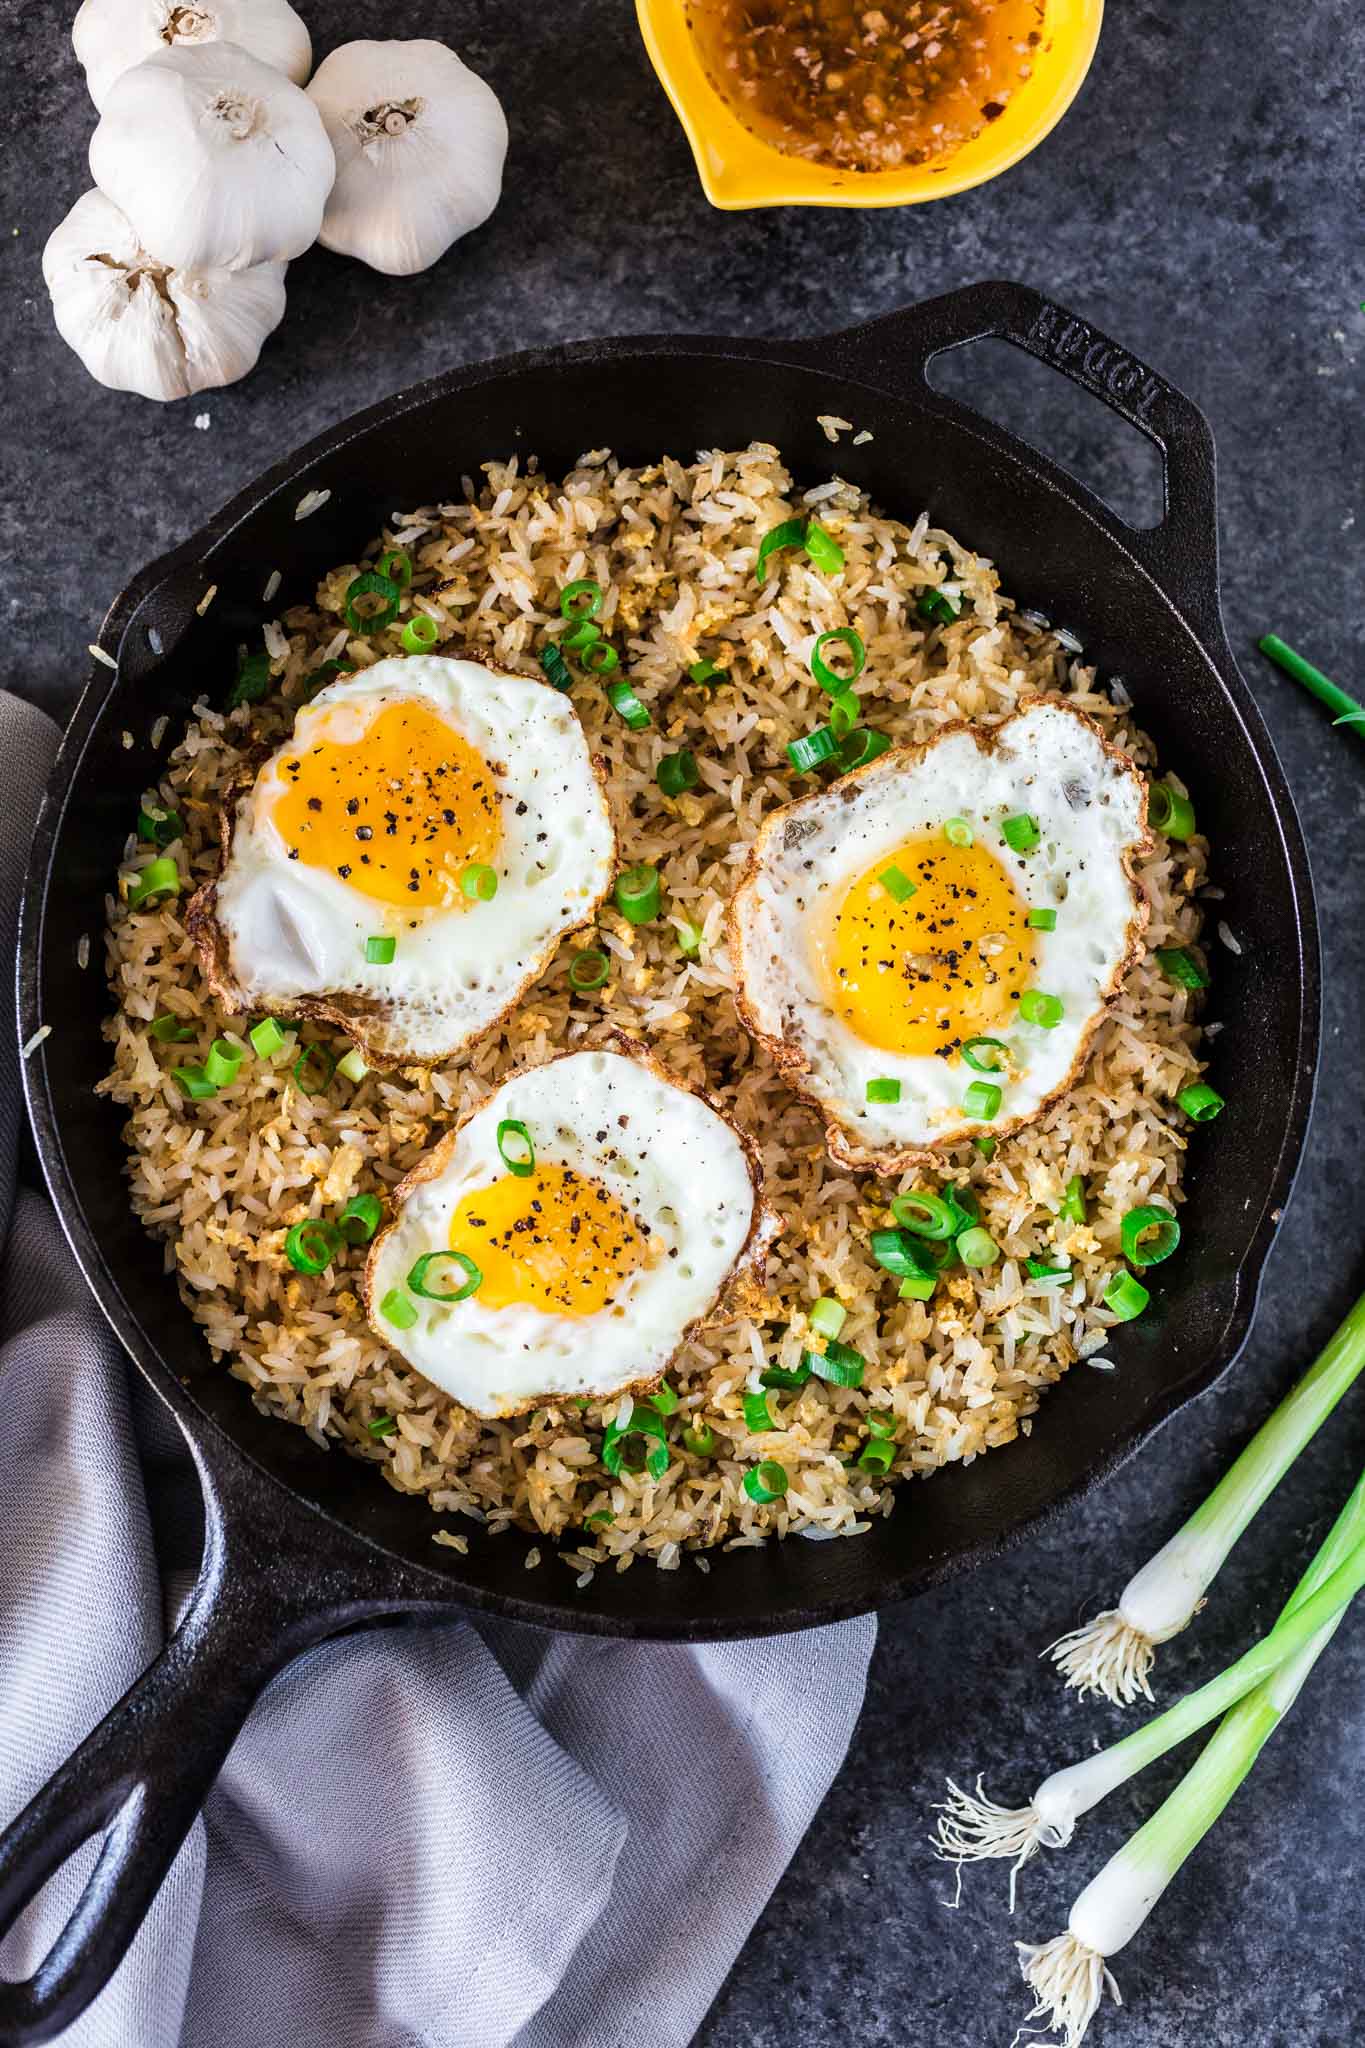 Filipino Garlic Fried Rice | www.oliviascuisine.com | Sinangag, or Garlic Fried Rice, is a popular Filipino breakfast, often served with a fried egg on top and a drizzle of vinegar sauce. Don't have a stomach for rice and garlic in the morning? No problem! This dish is also amazing for lunch or as a side for dinner.